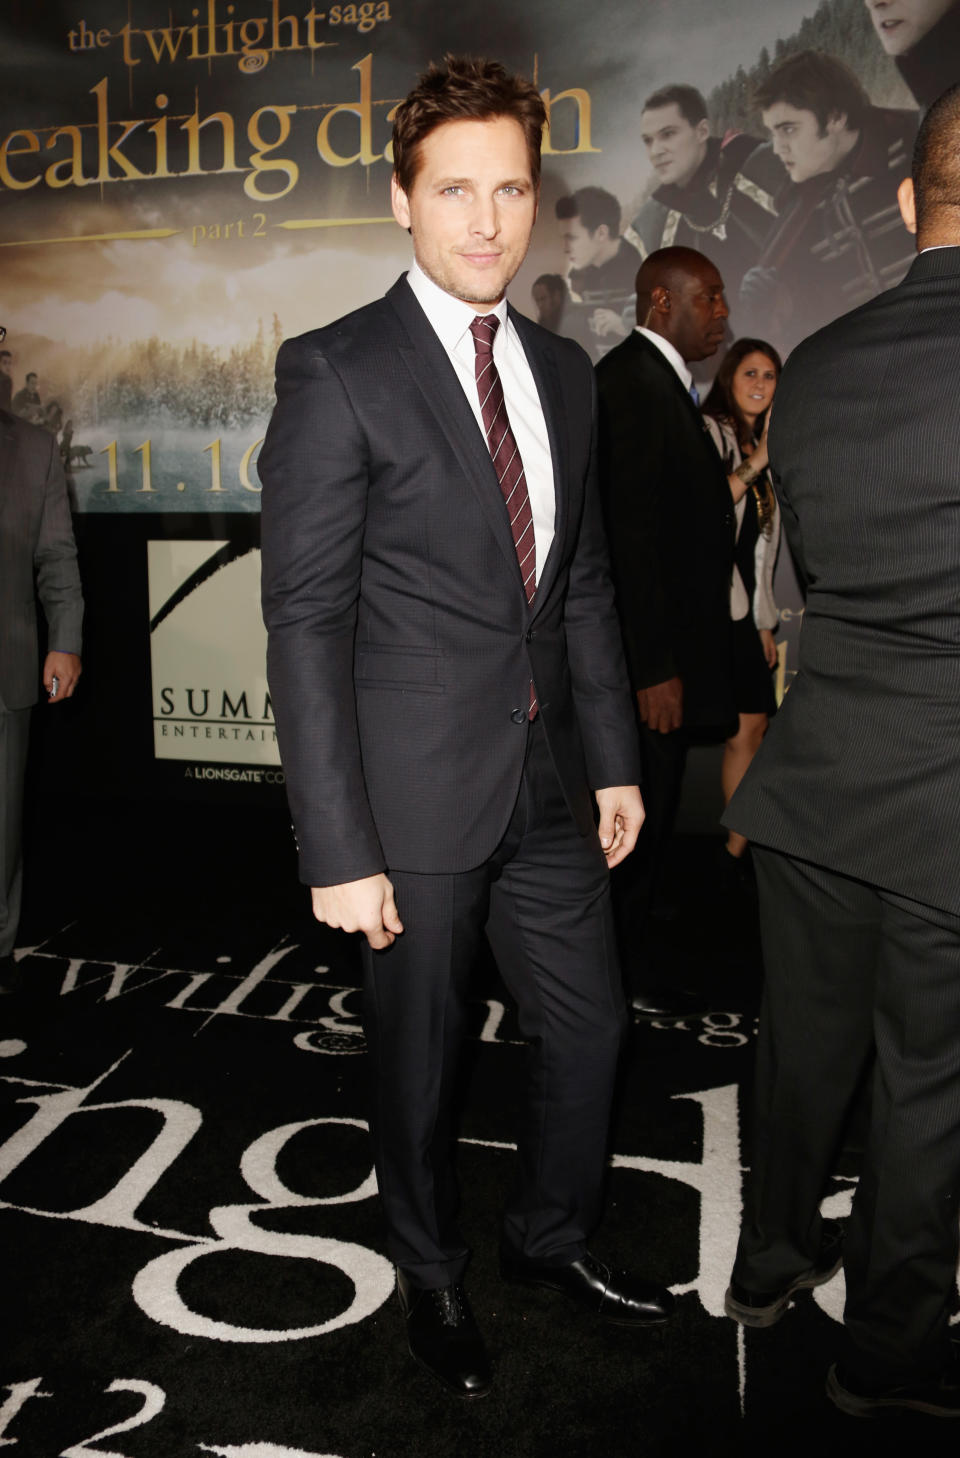 Peter Facinelli arrives at "The Twilight Saga: Breaking Dawn - Part 2" Los Angeles premiere at Nokia Theatre L.A. Live on November 12, 2012 in Los Angeles, California. (Photo by Jeff Vespa/WireImage)